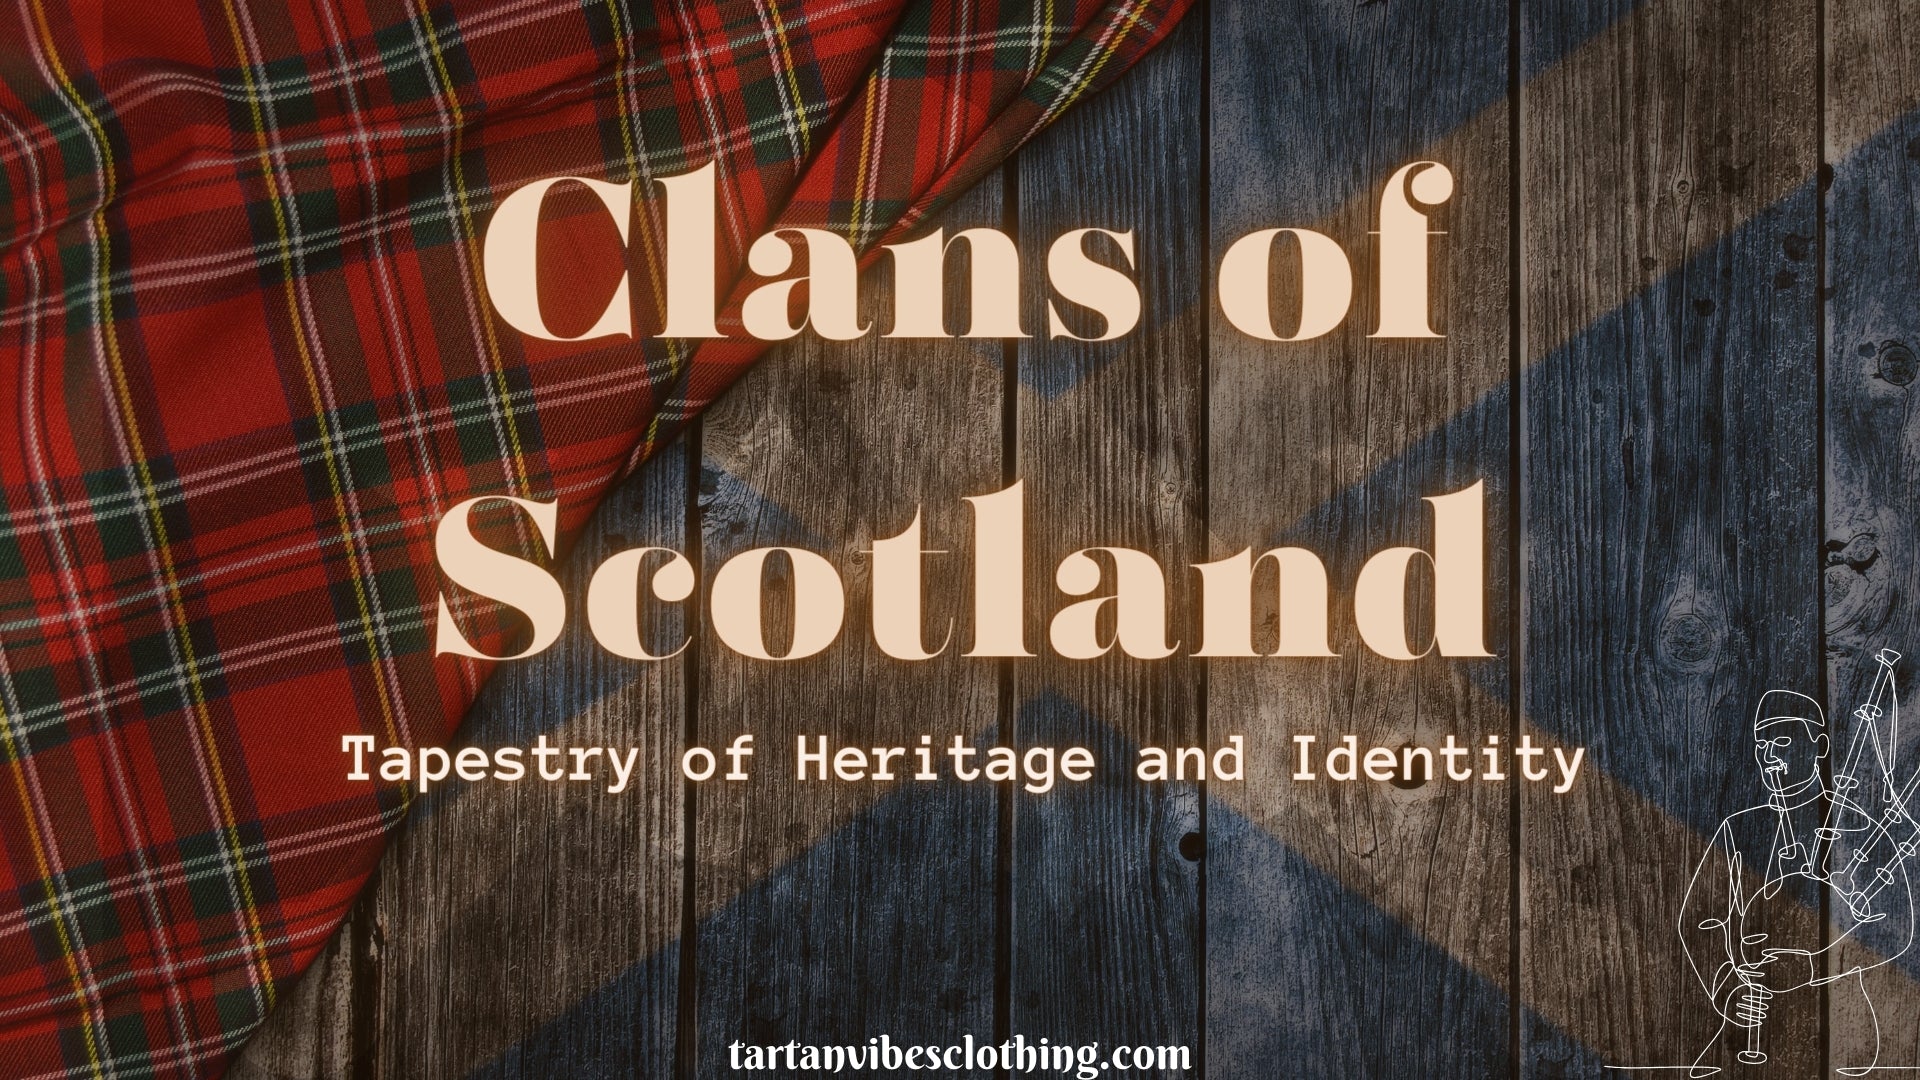 Clans of Scotland: Weaving a Tapestry of Heritage and Identity